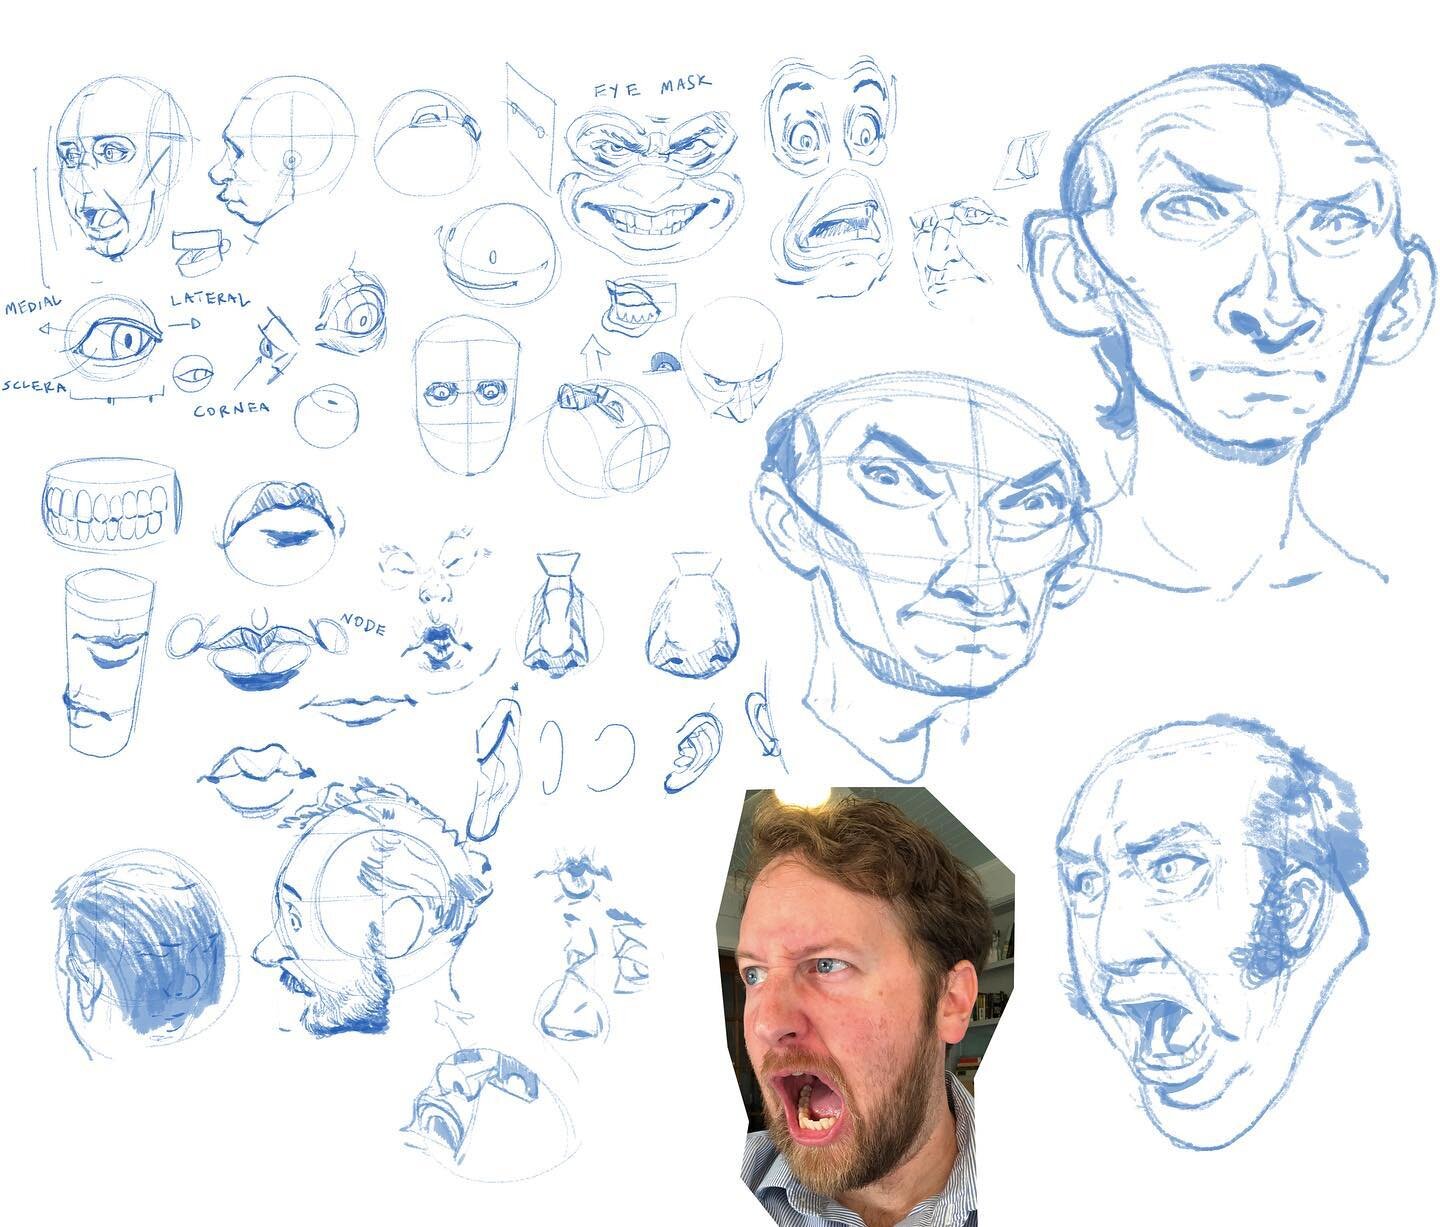 I had fun drawing on this virtual whiteboard today. The lesson is sort of a bunch of quick tips for drawing the face for my Illustrative Anatomy and Perspective course. Not intended to replace having a reference but tried to focus today on using the 